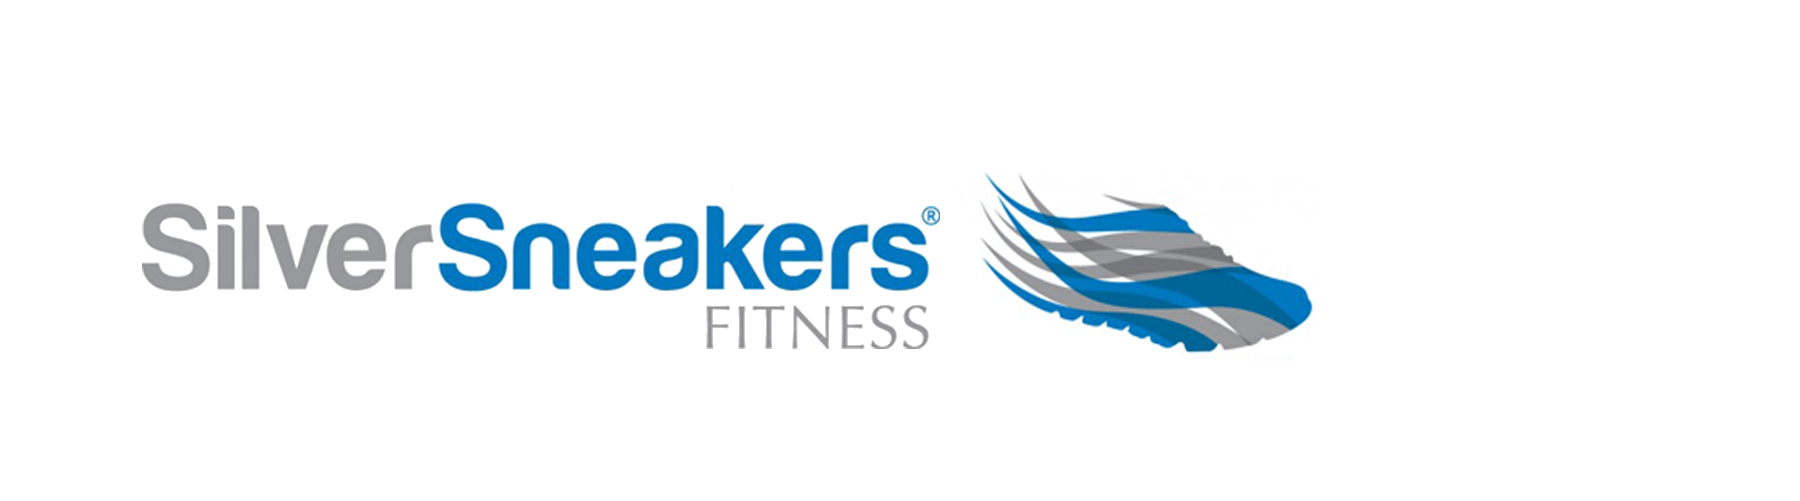 SilverSneakers Logo - Silver Sneakers Fitness Program in Tampa | JCC on the Cohn Campus